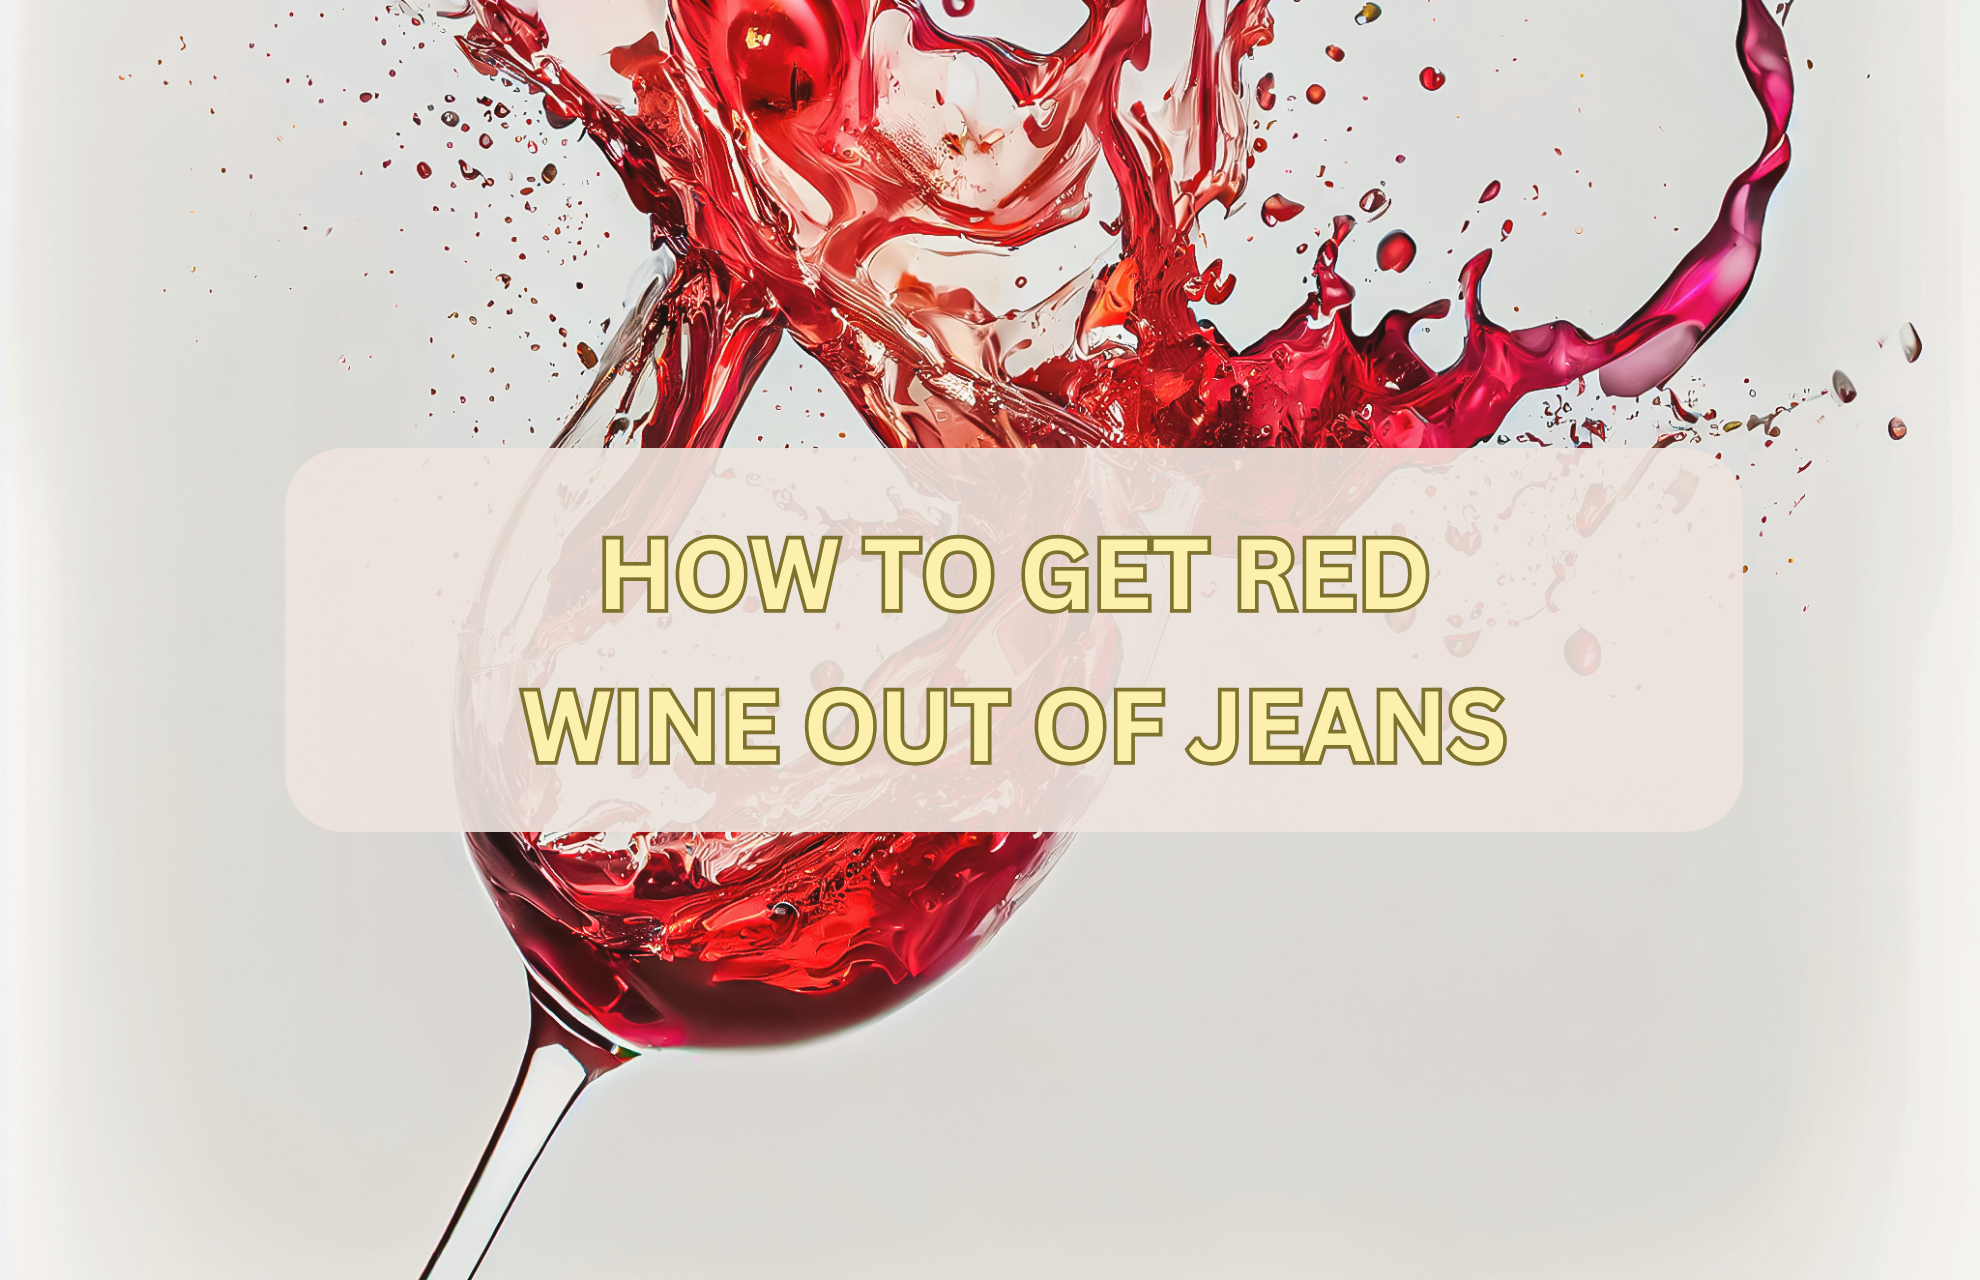 HOW TO GET RED WINE OUT OF JEANS